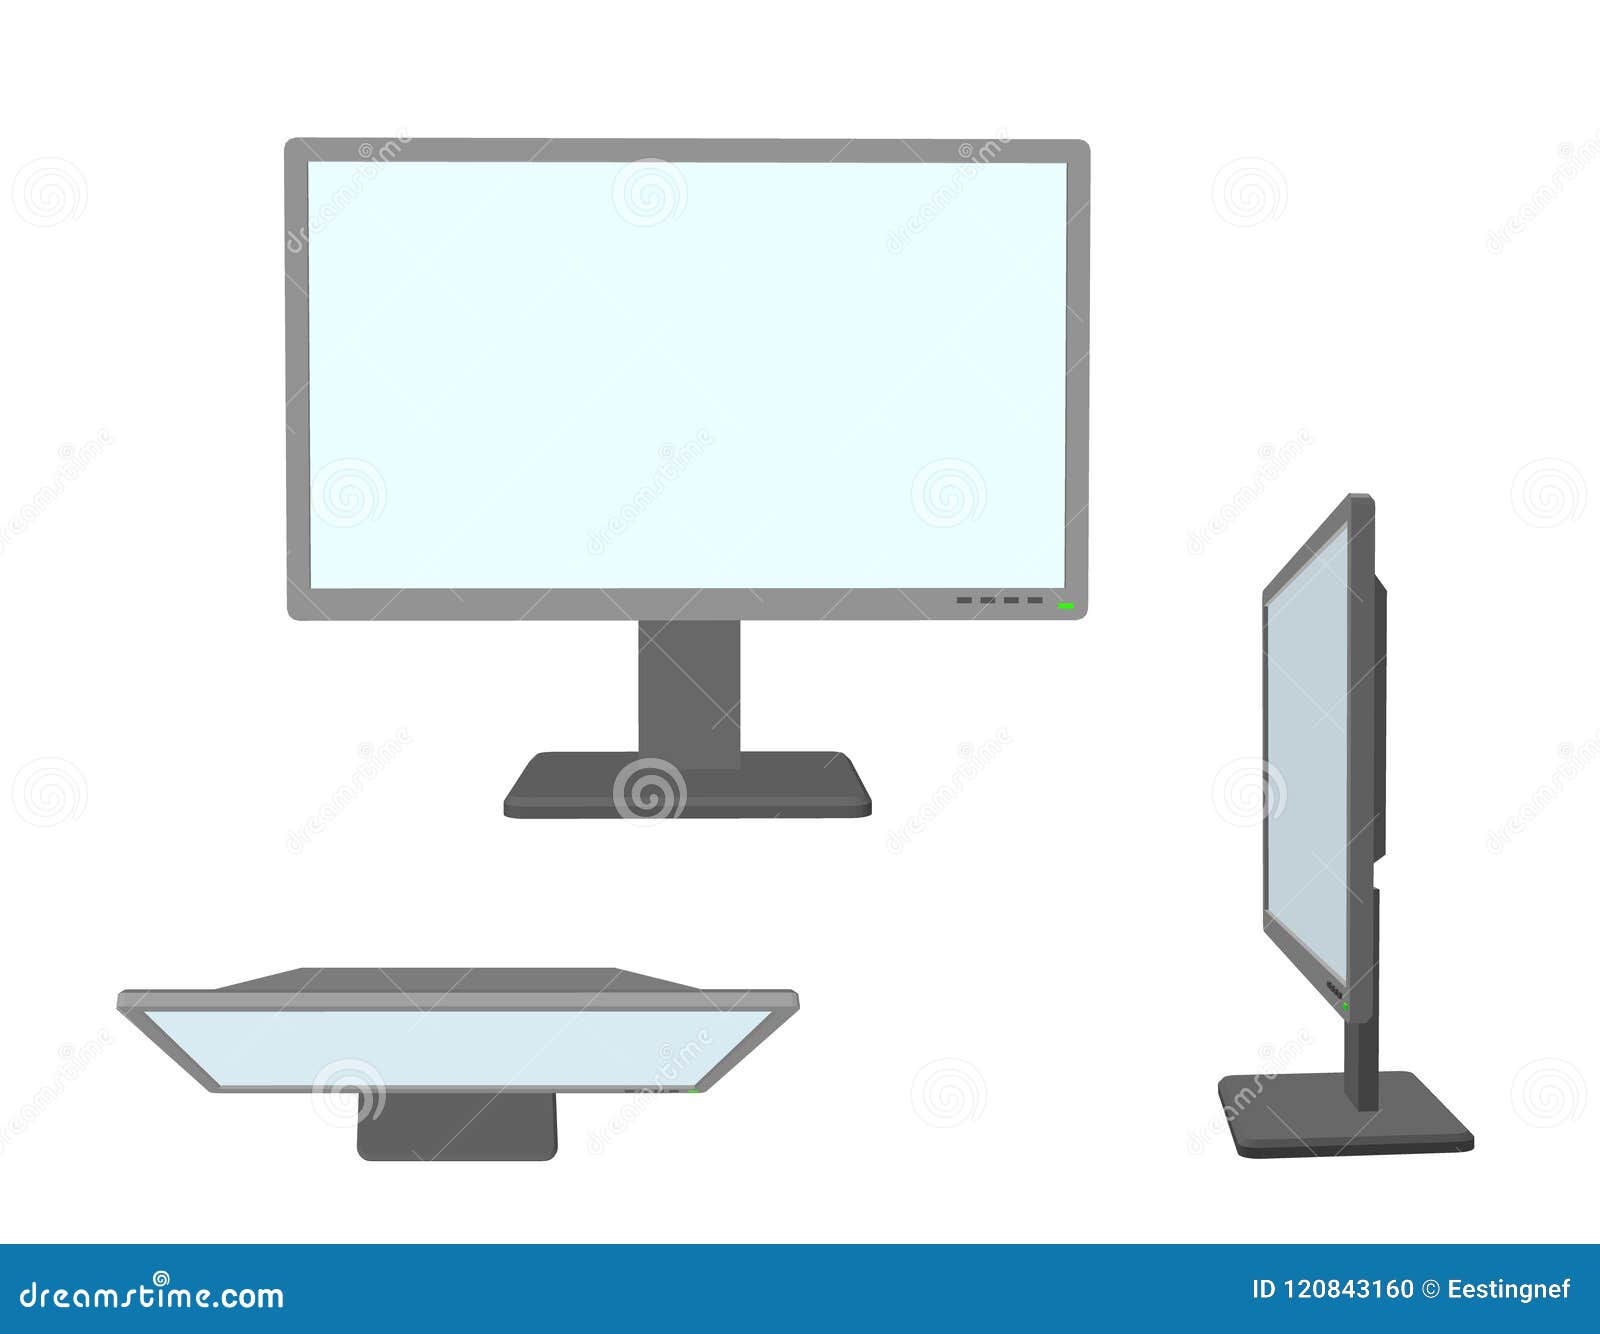 Computer Monitor Isolated On White Background 3d Vector Illustration Stock Vector Illustration Of Equipment Illustration